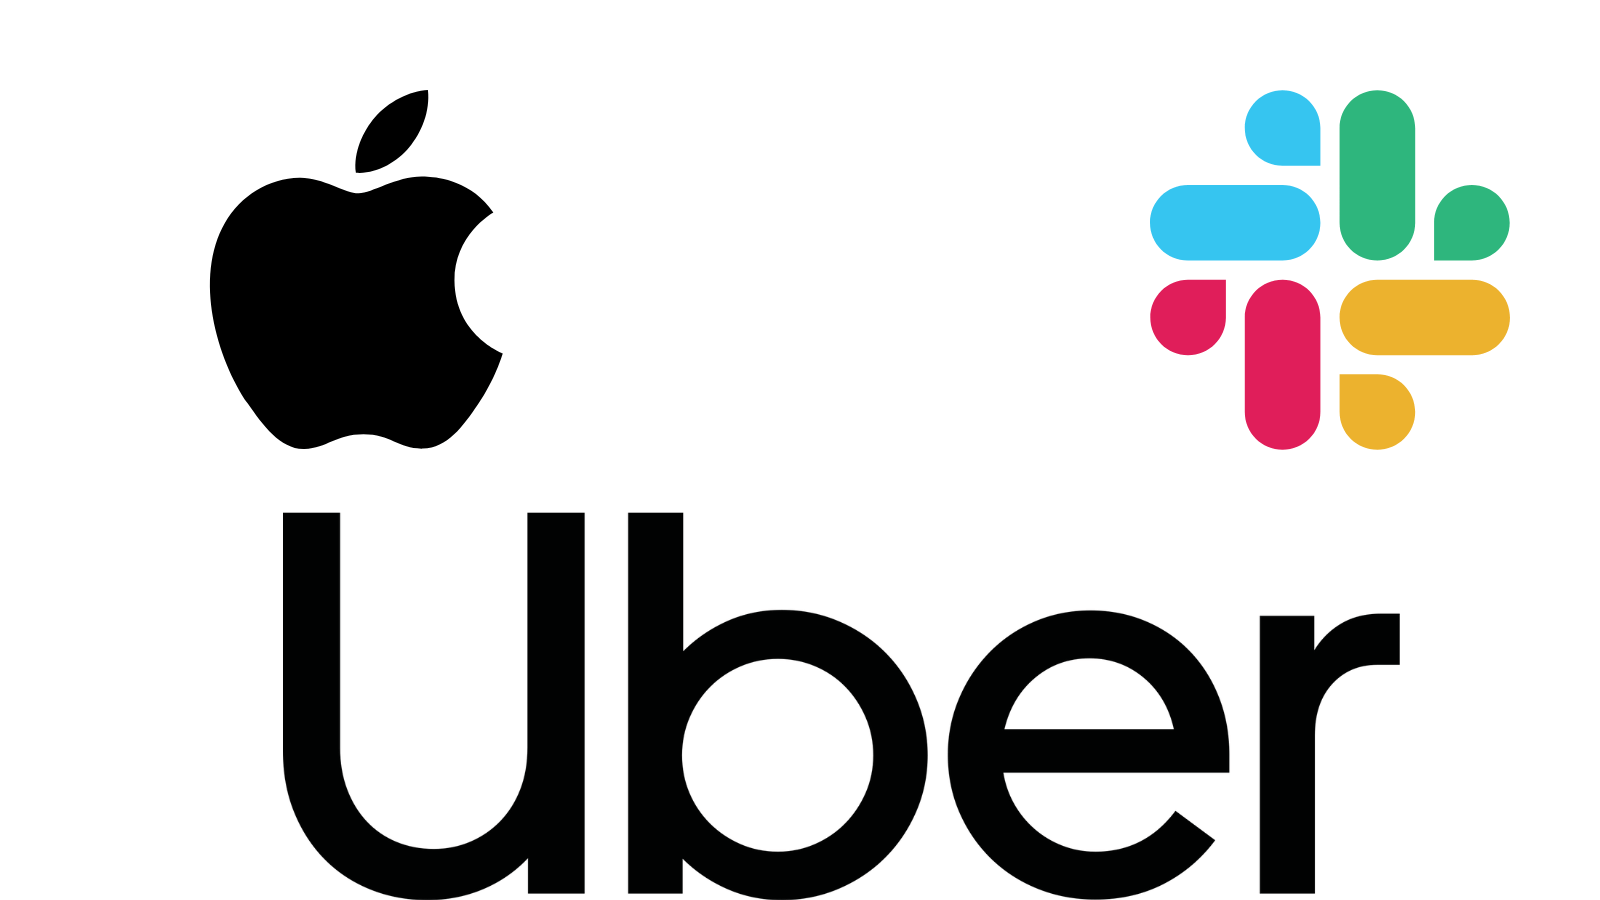 The logos for Apple, Slack, and Uber